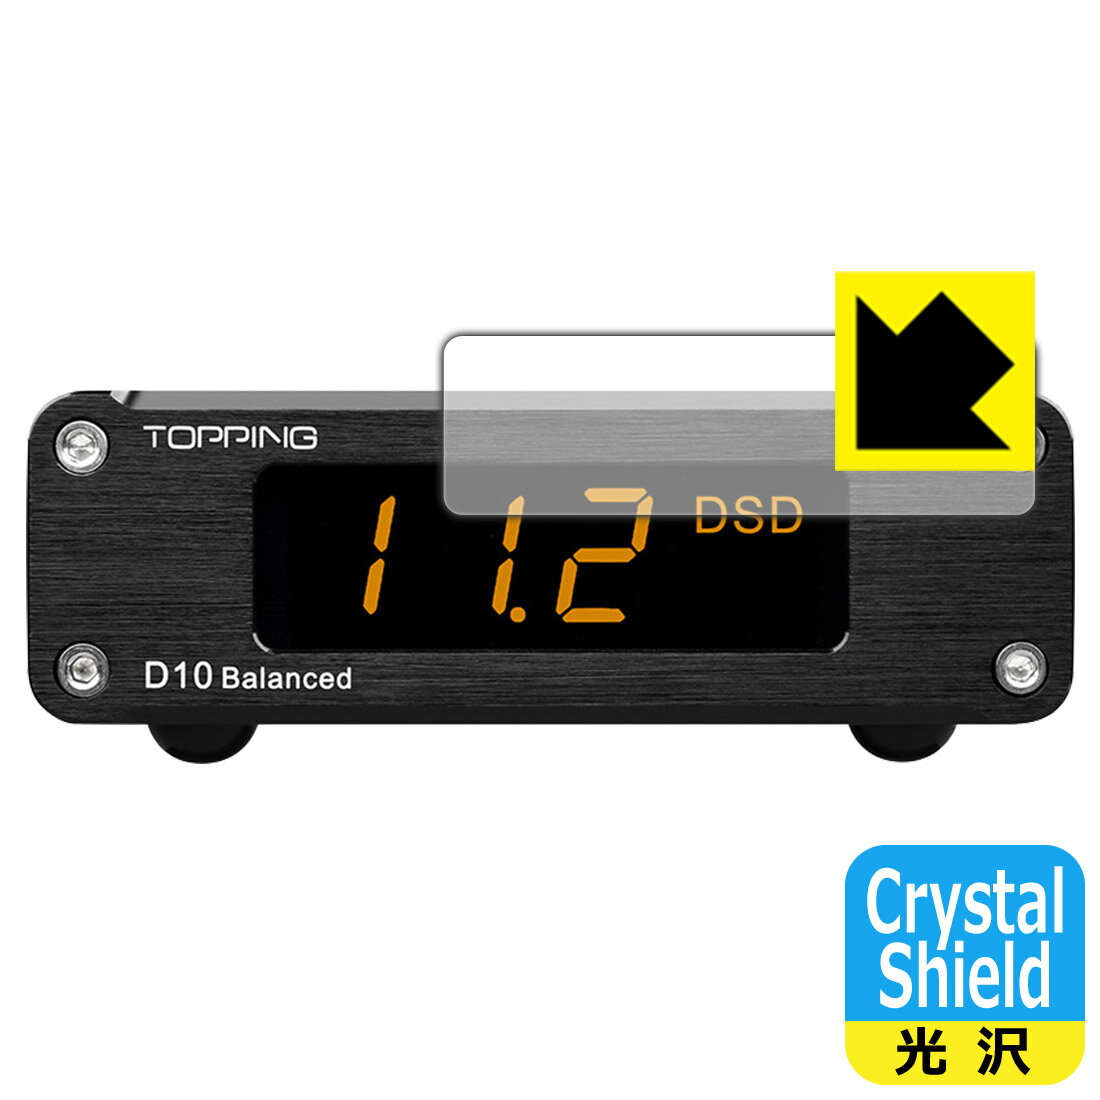 Crystal Shield【光沢】保護フィルム TOPPING D10 / D10 Balanced / D10s (3枚セット) 日本製 自社製造直販